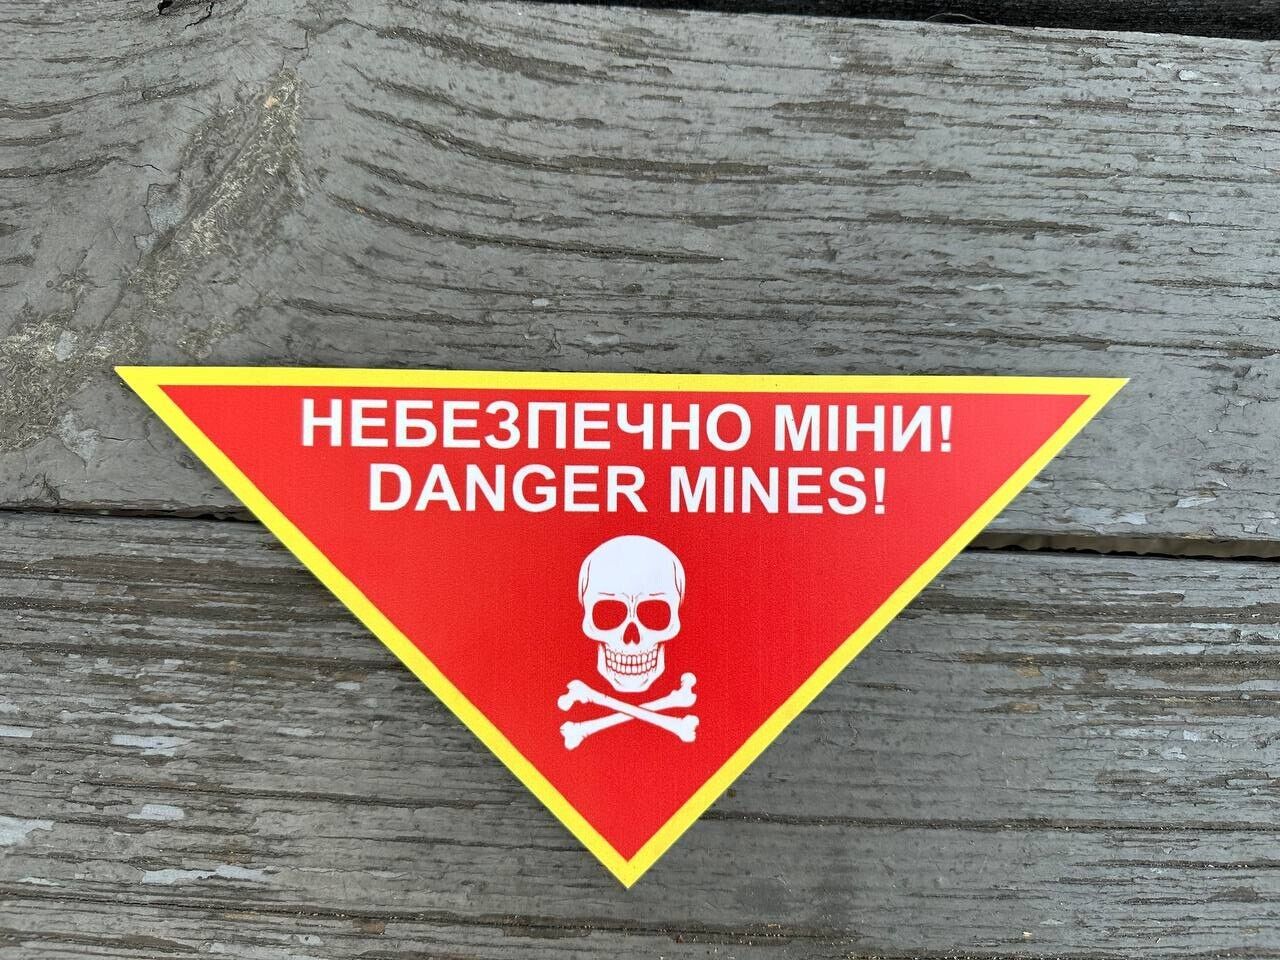 UKRAINE Caution sign Watch out for mines